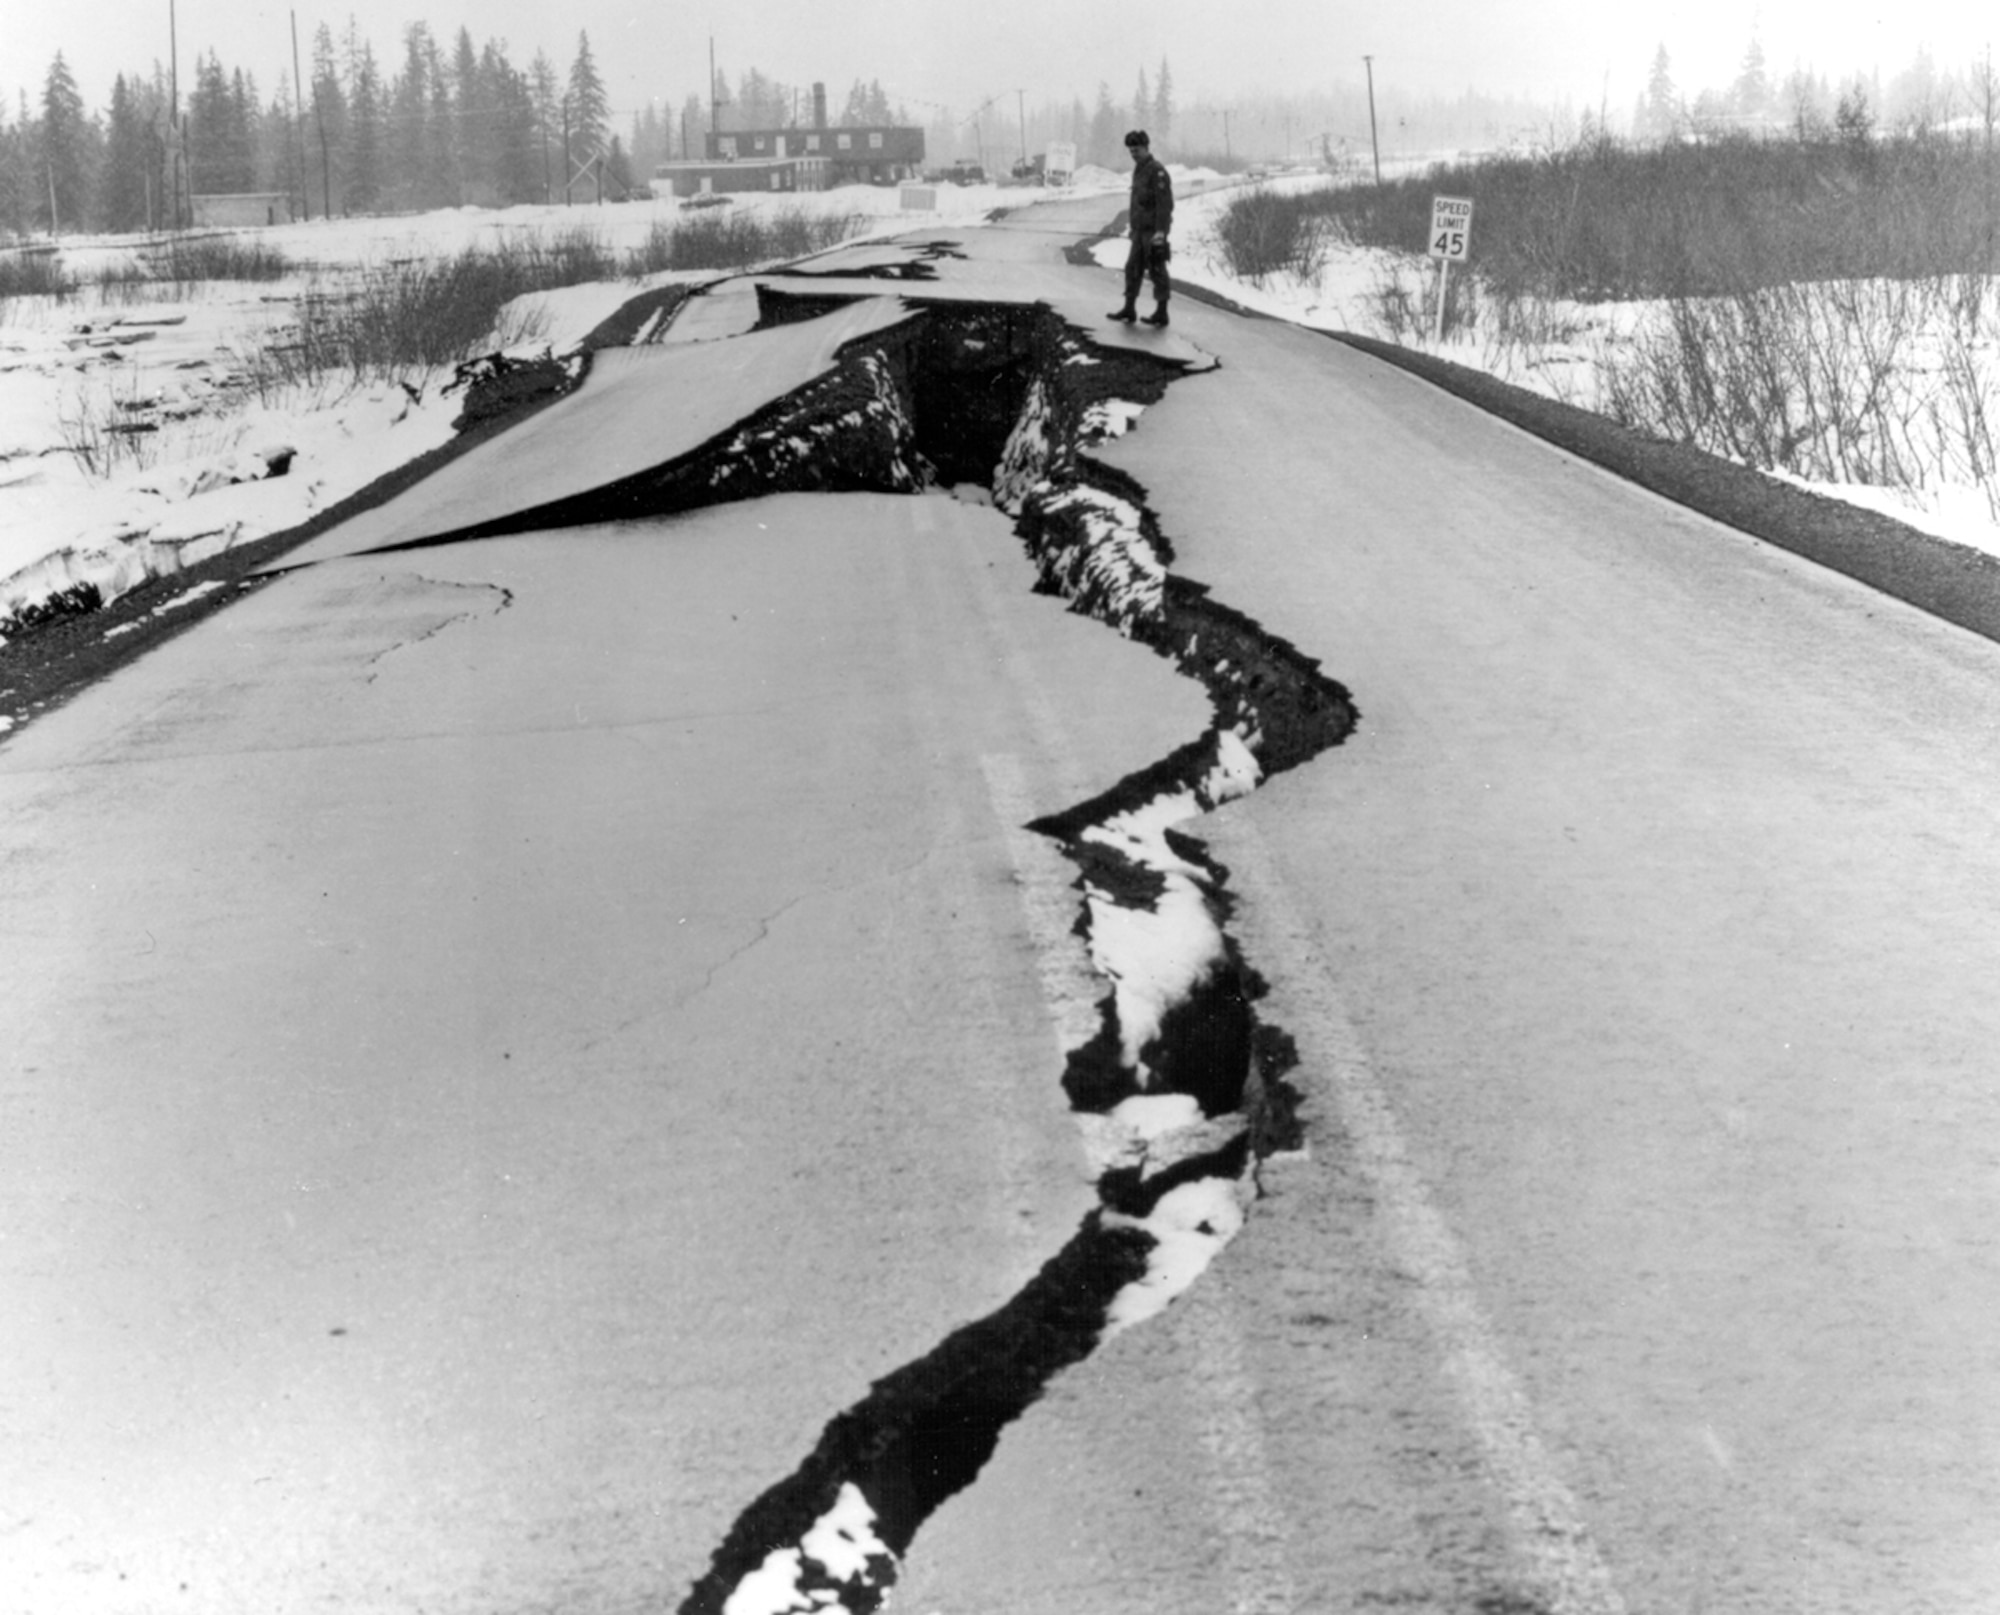 Alaska Earthquake March 27, 1964. Fissures in Seward Highway near The Alaska Railroad station at Portage, at the head of Turnagain Arm. Many bridges were also damaged. At some places, tectonic subsidence and consolidation of alluvial materials dropped both highway and railroad below high-tide levels. (Photo by U.S. Army)